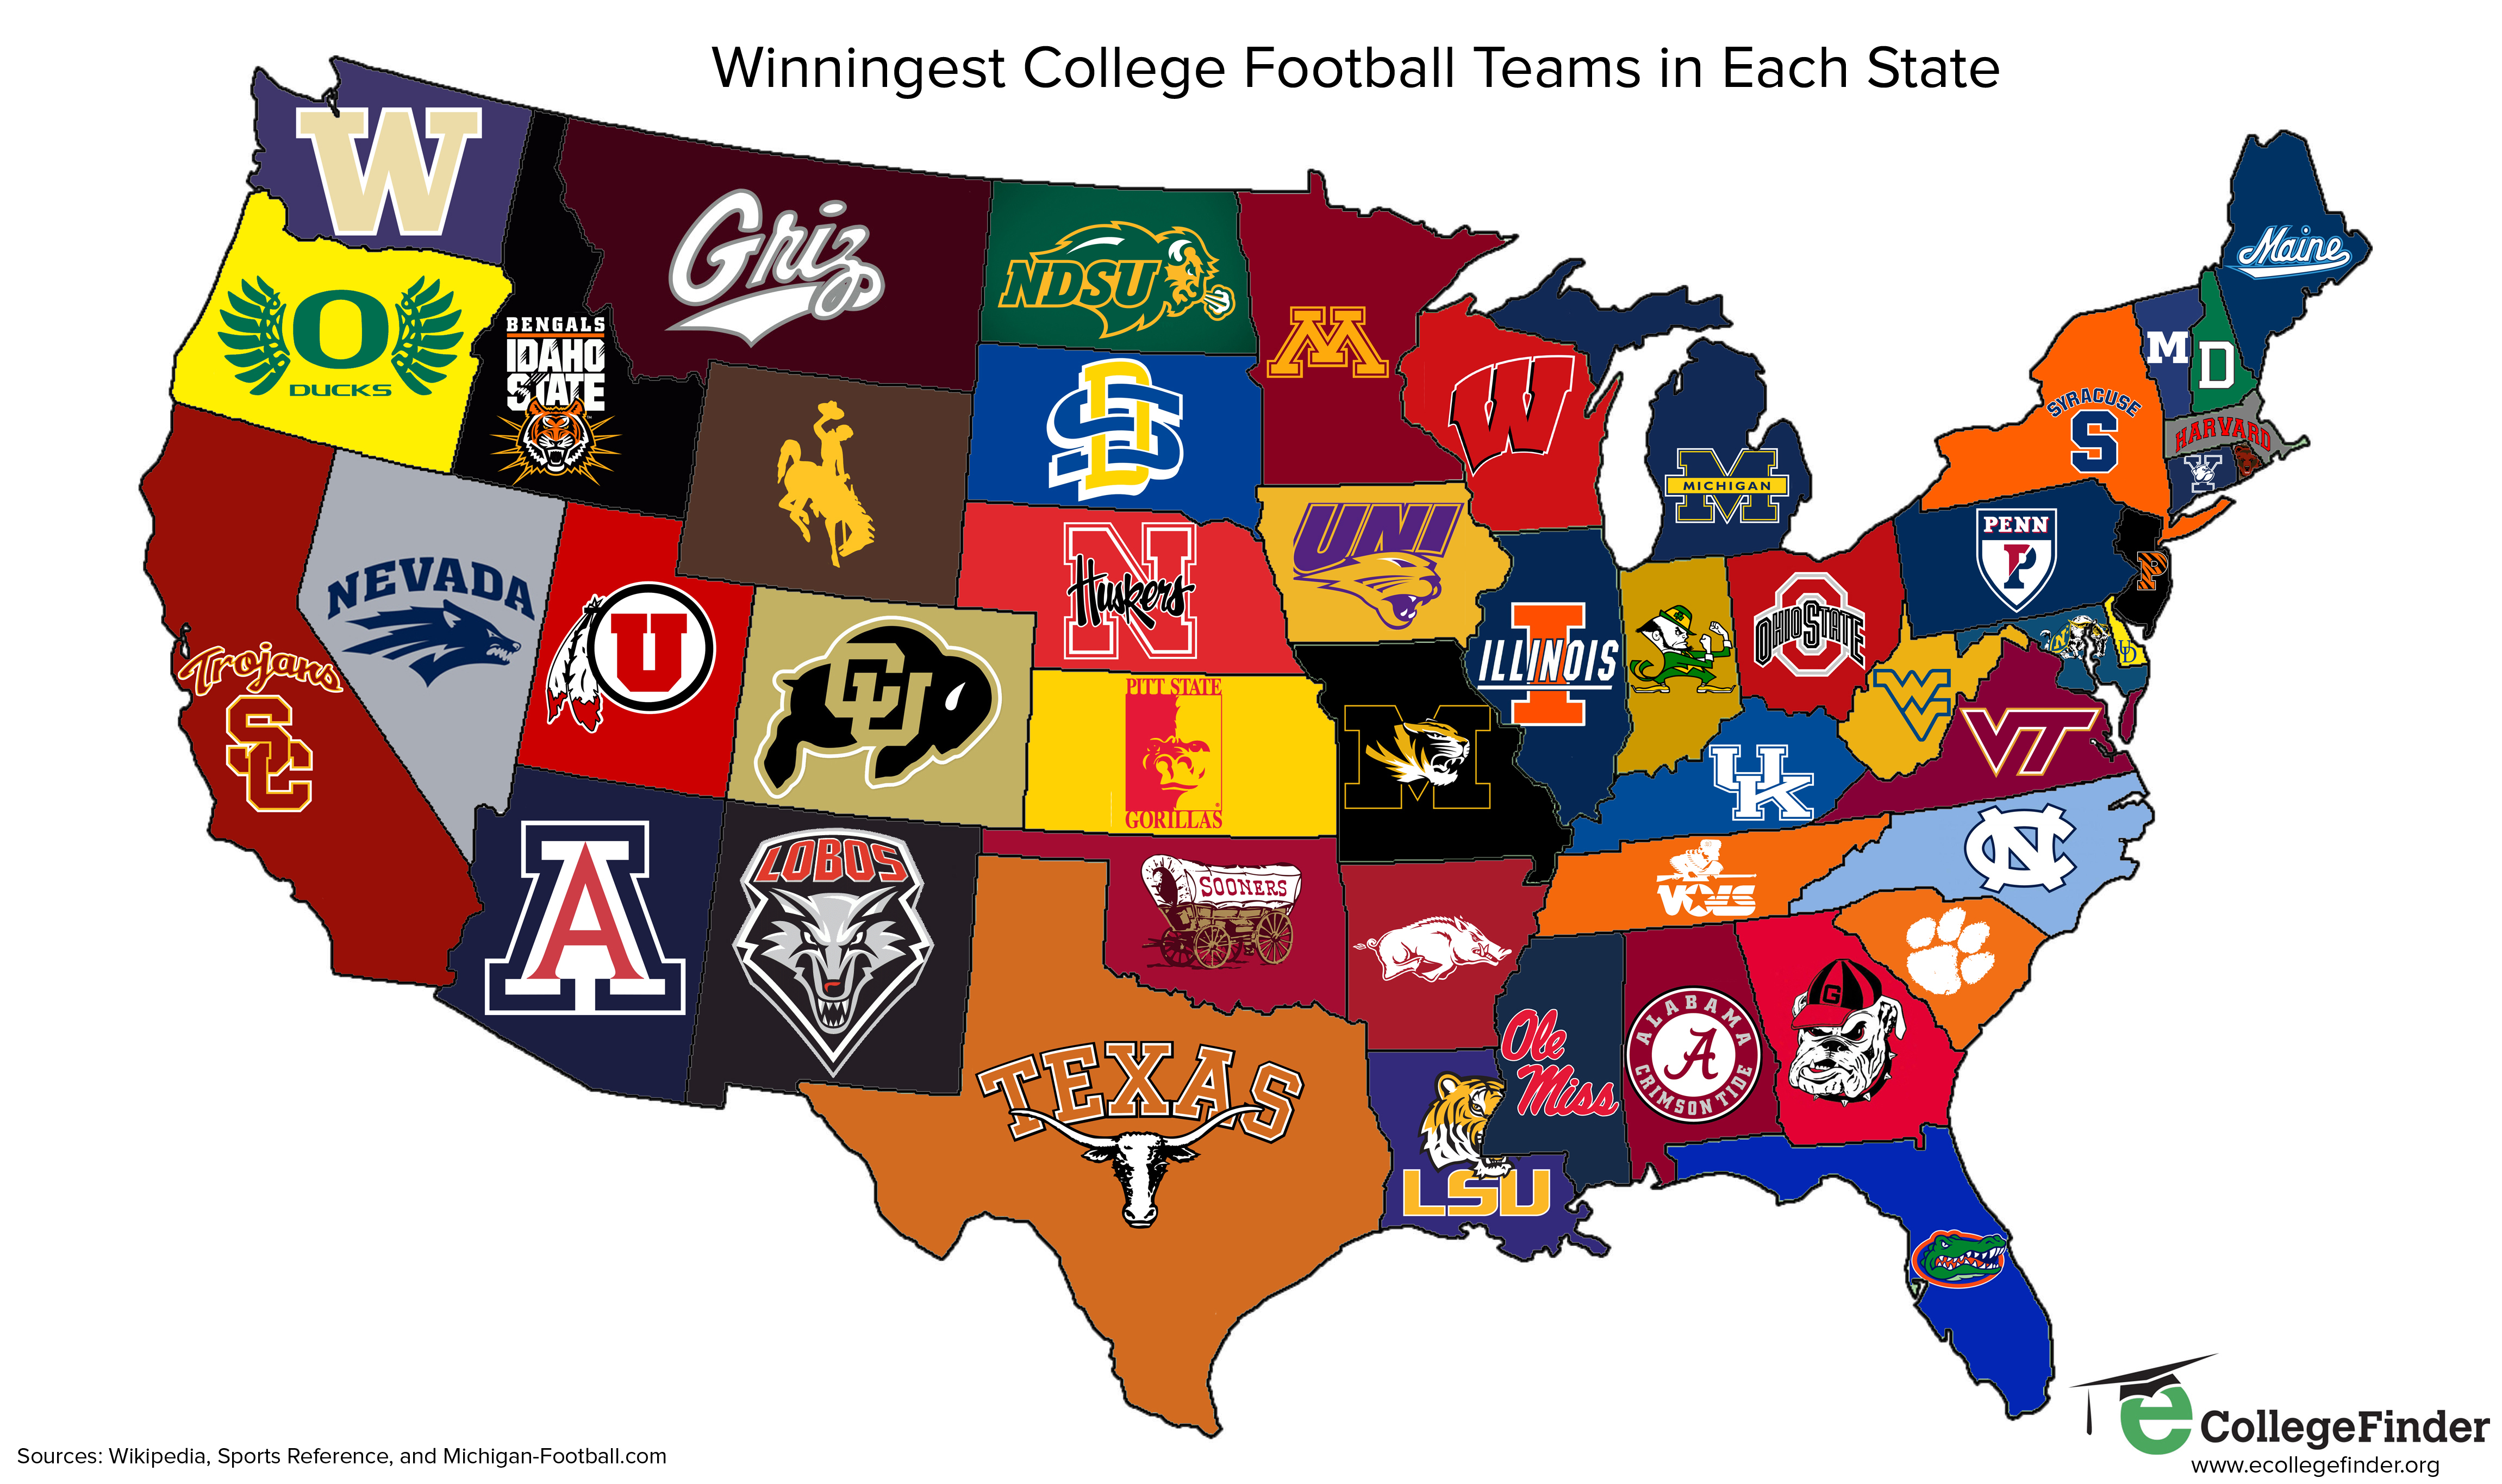 MAP: The Winningest College Football Team in Each State